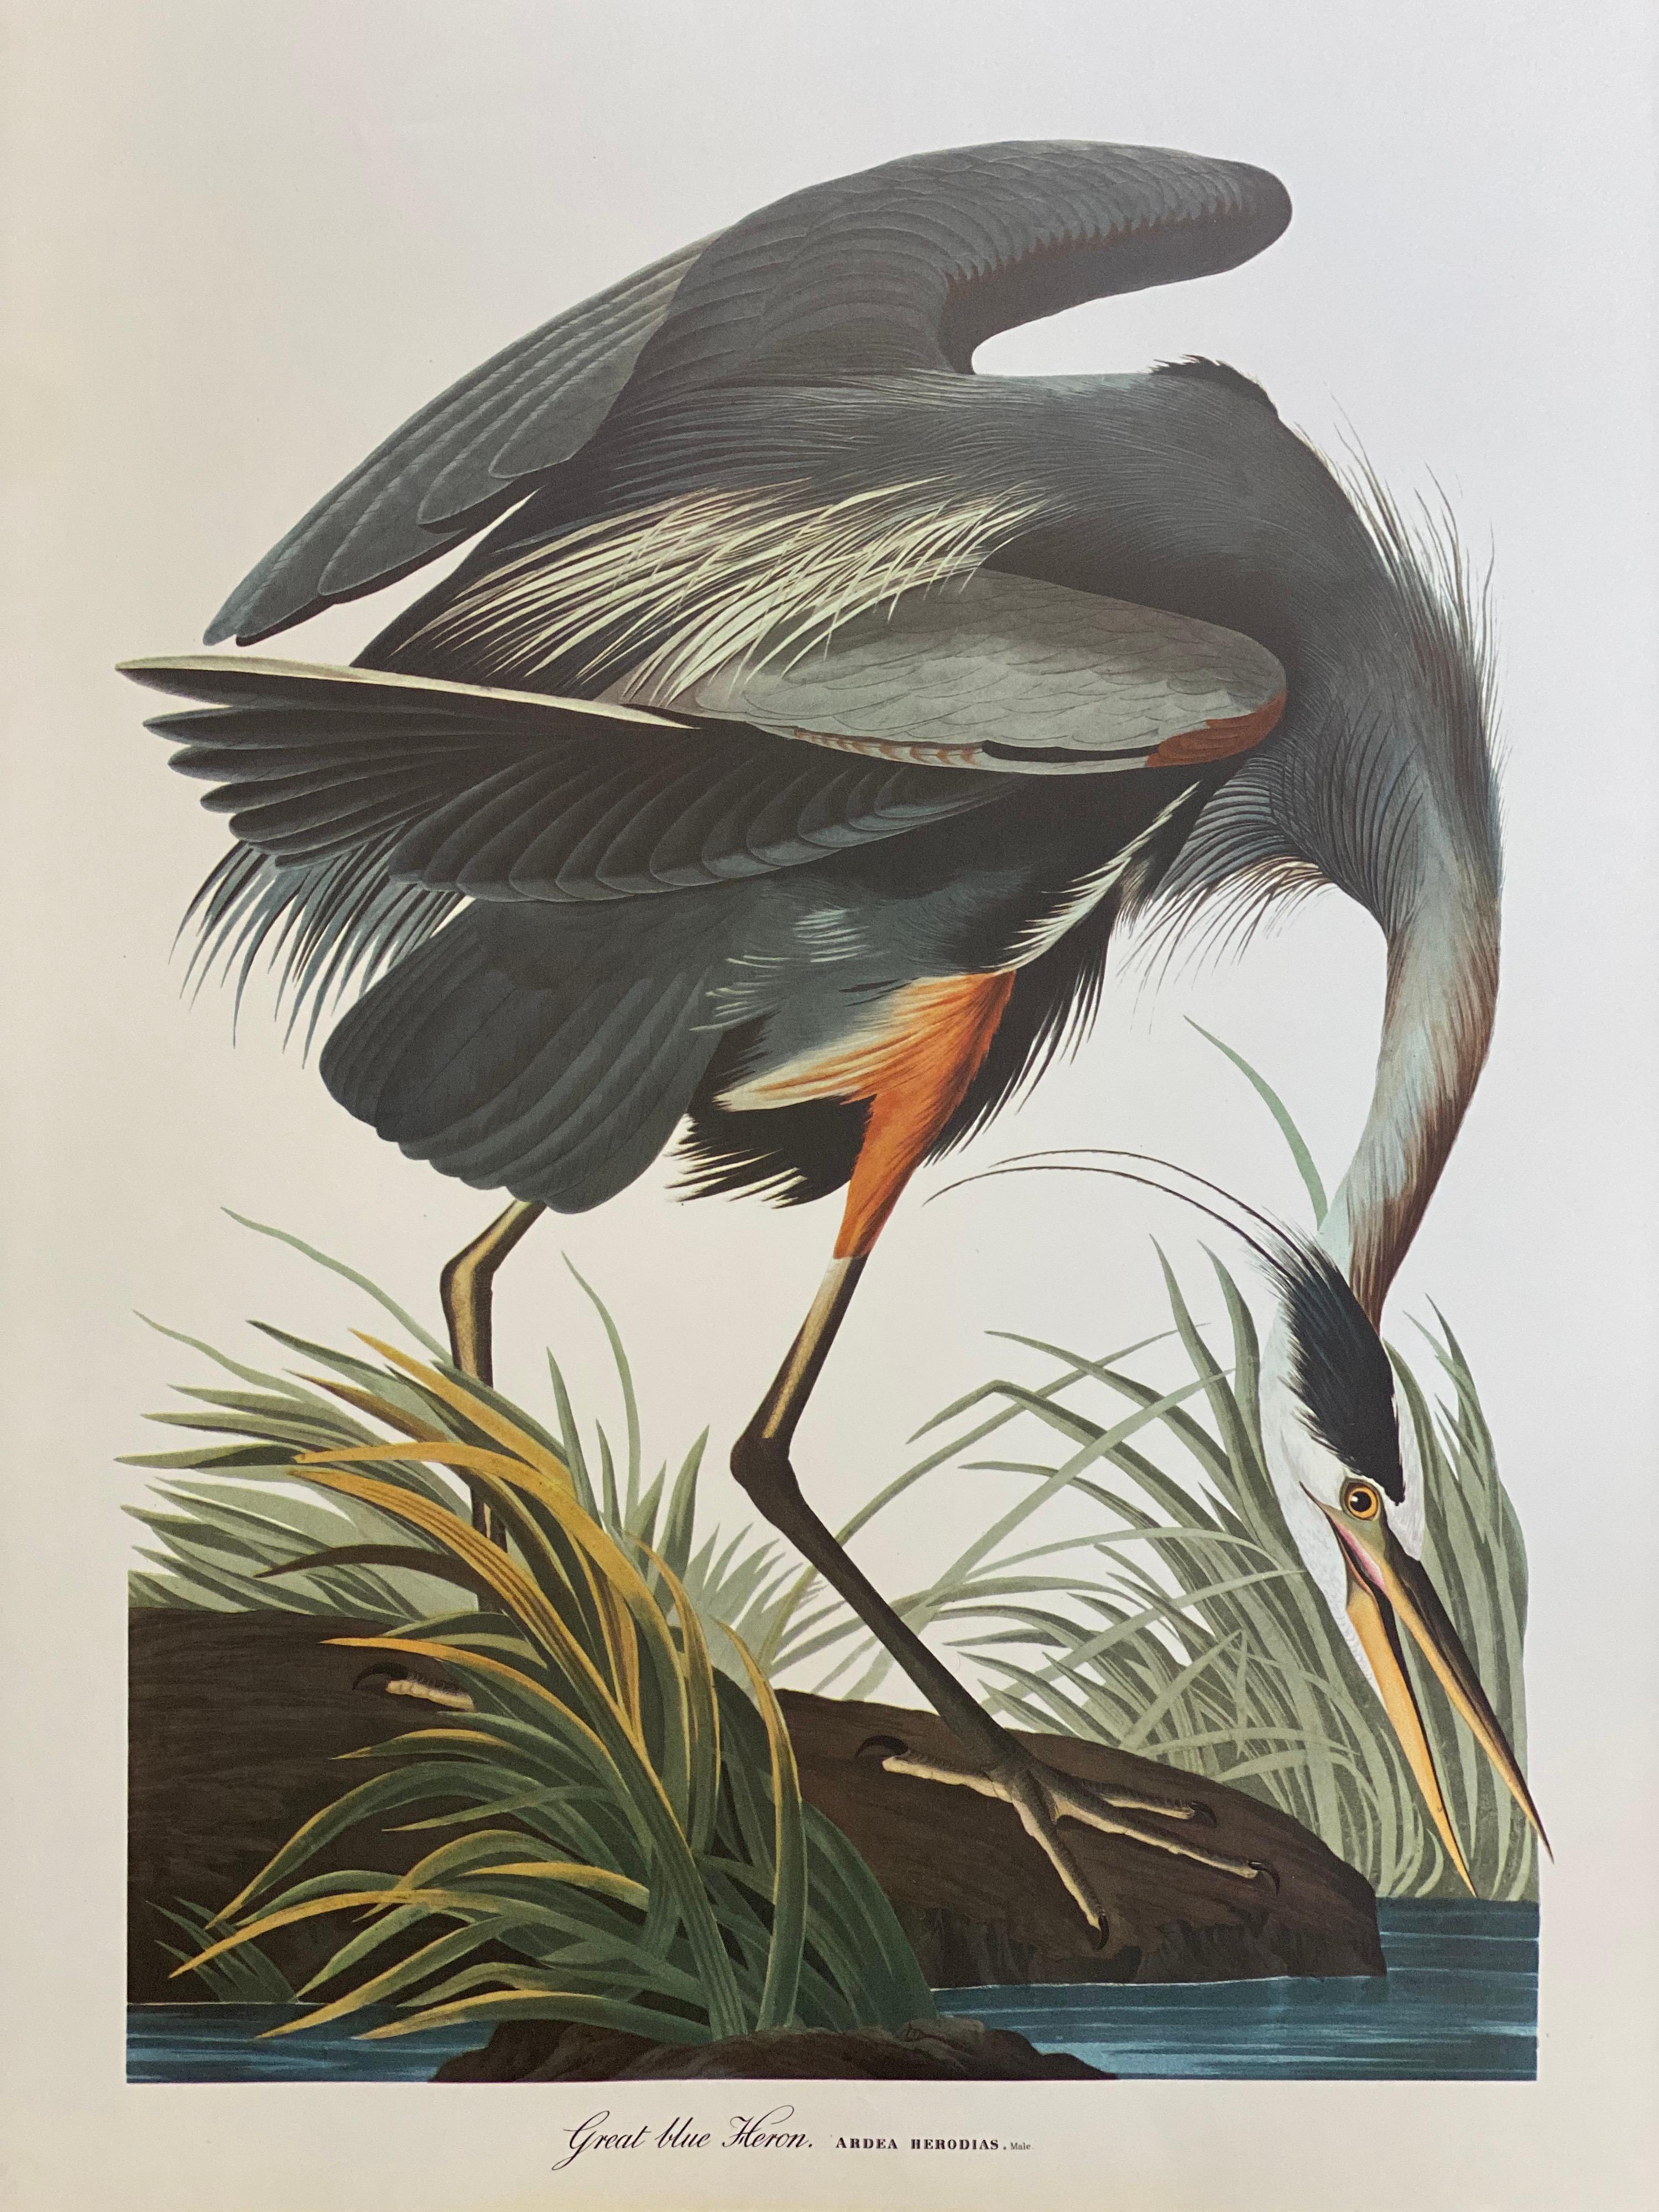 Classical Bird print, 
after John James Audubon, 
printed by Harry N. Abrams, Publishers, New York
unframed, 17 x 14 inches color print on paper
Condition: very good
Provenance: from a private collector here in the UK. 

Free shipping